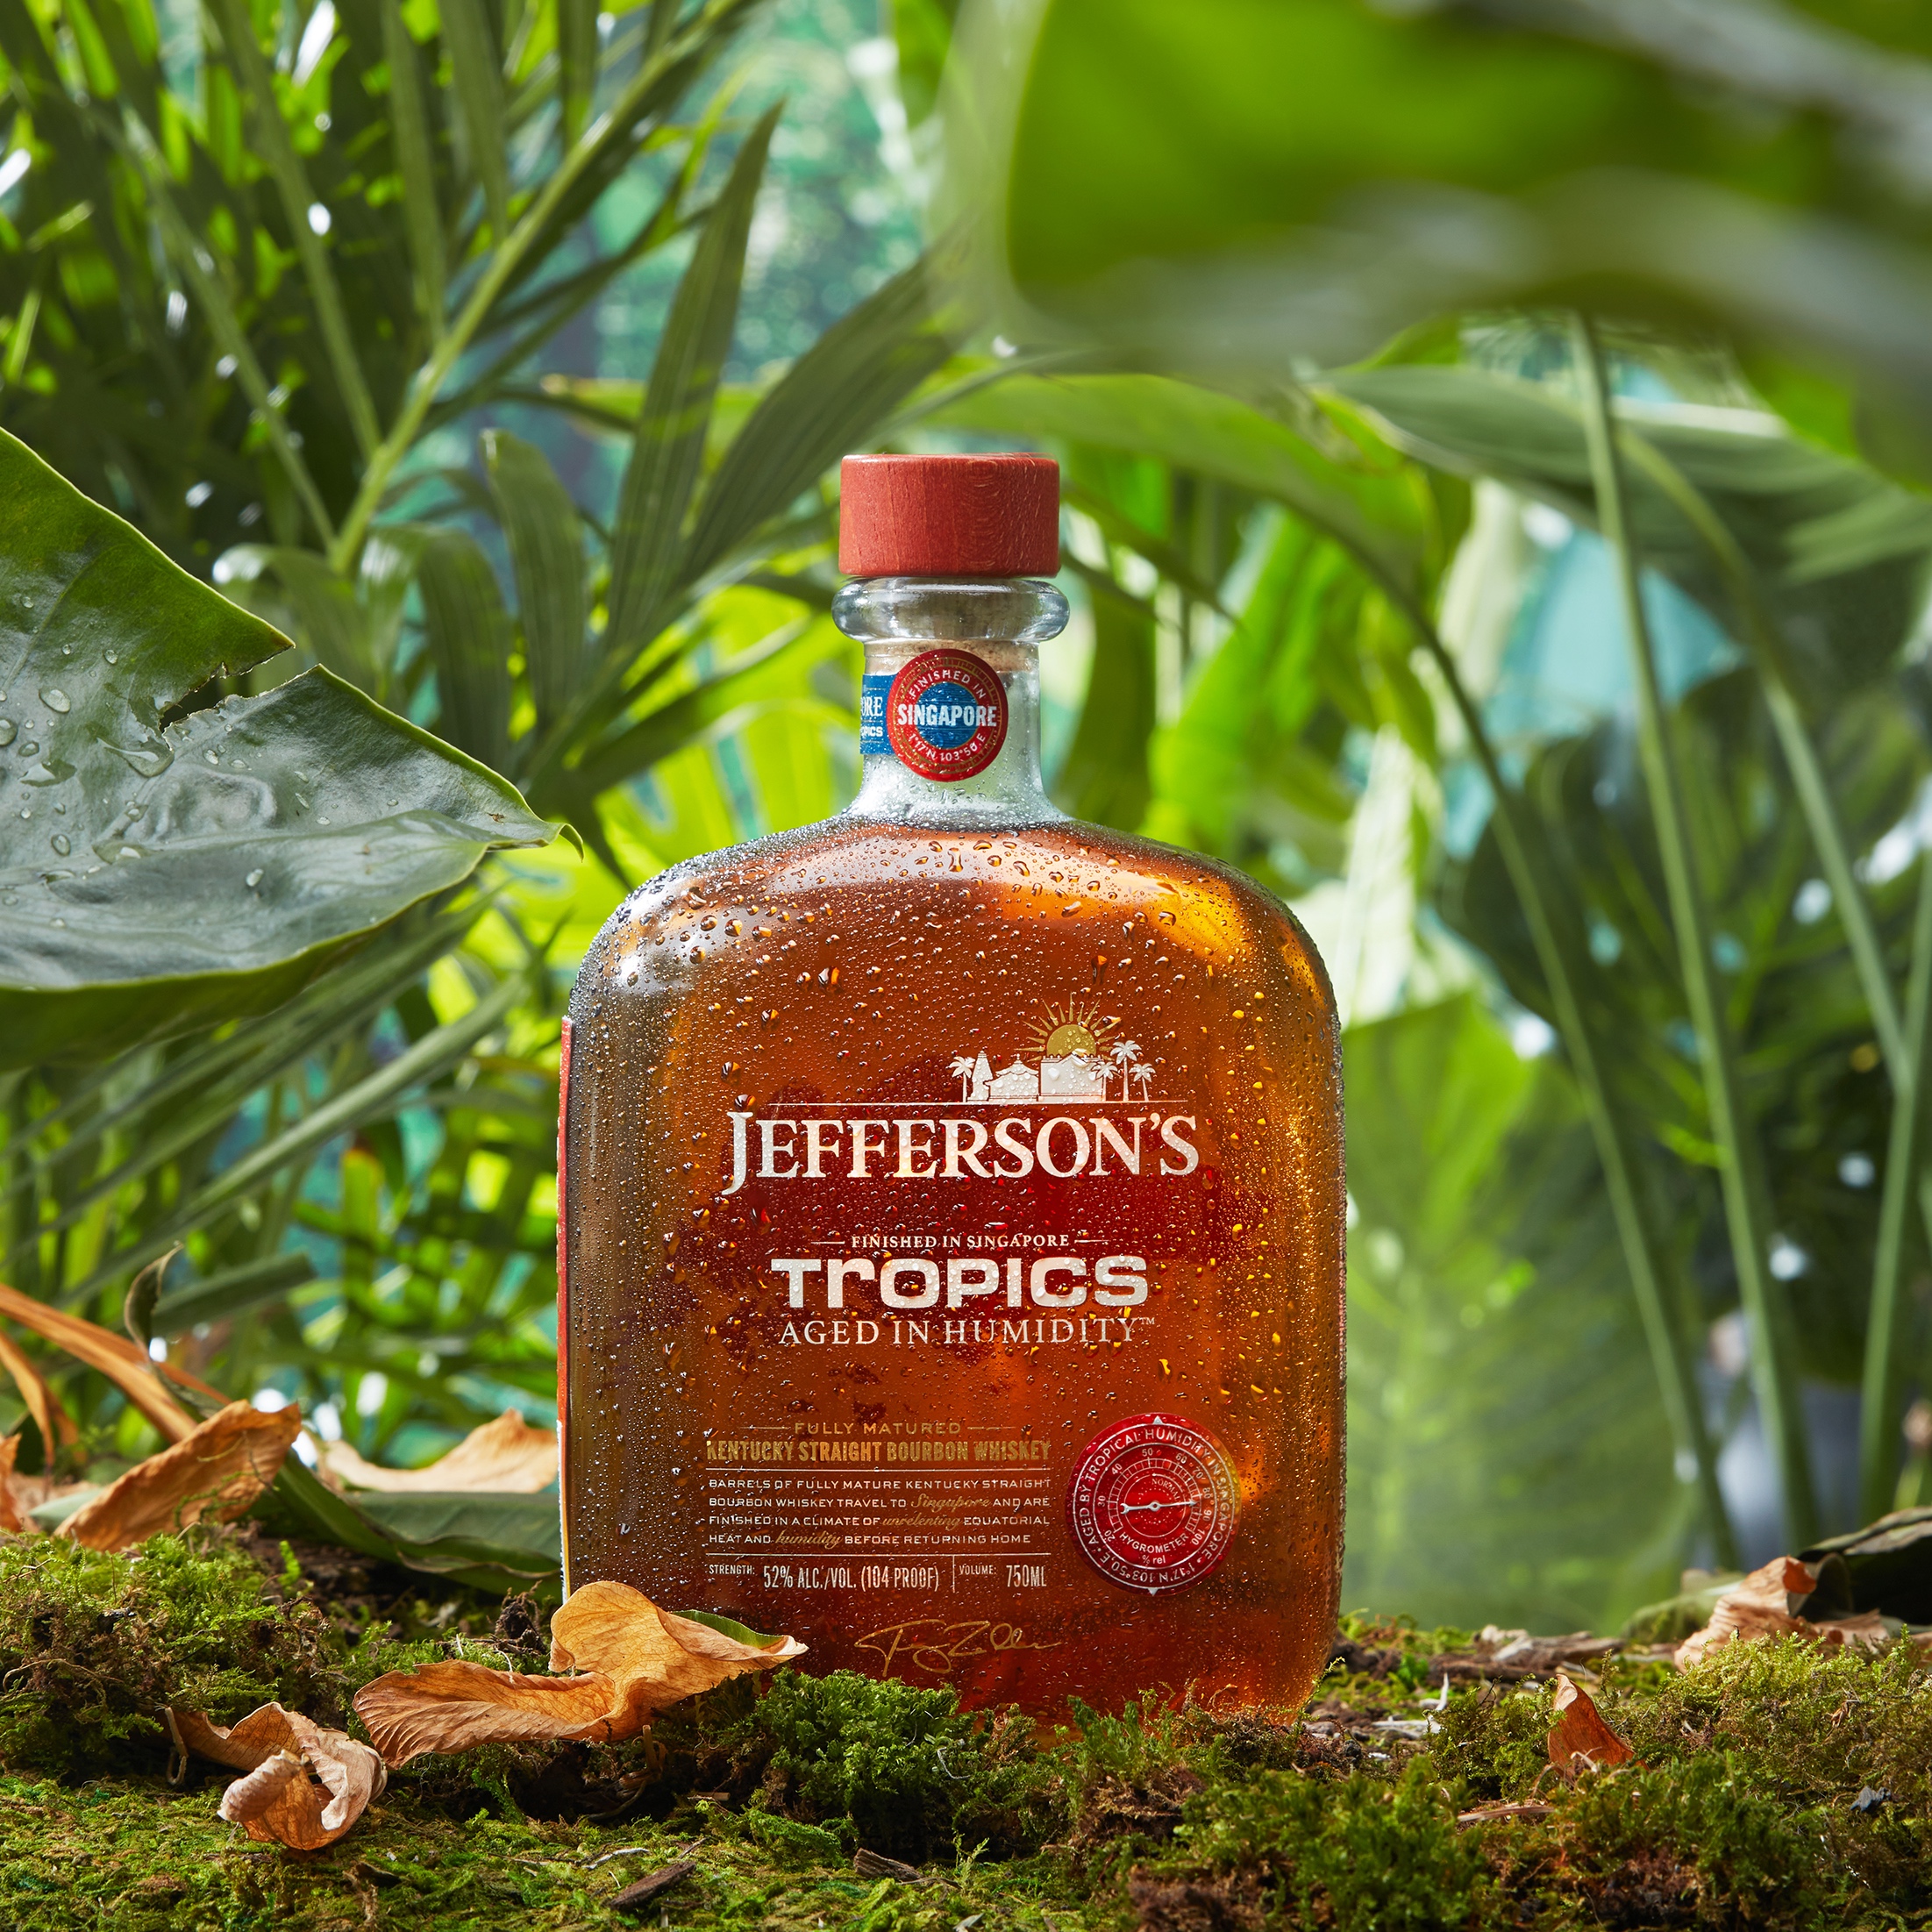 A bottle of Jefferson's Tropics Bourbon, Aged in Humidity, against a lush green backdrop.